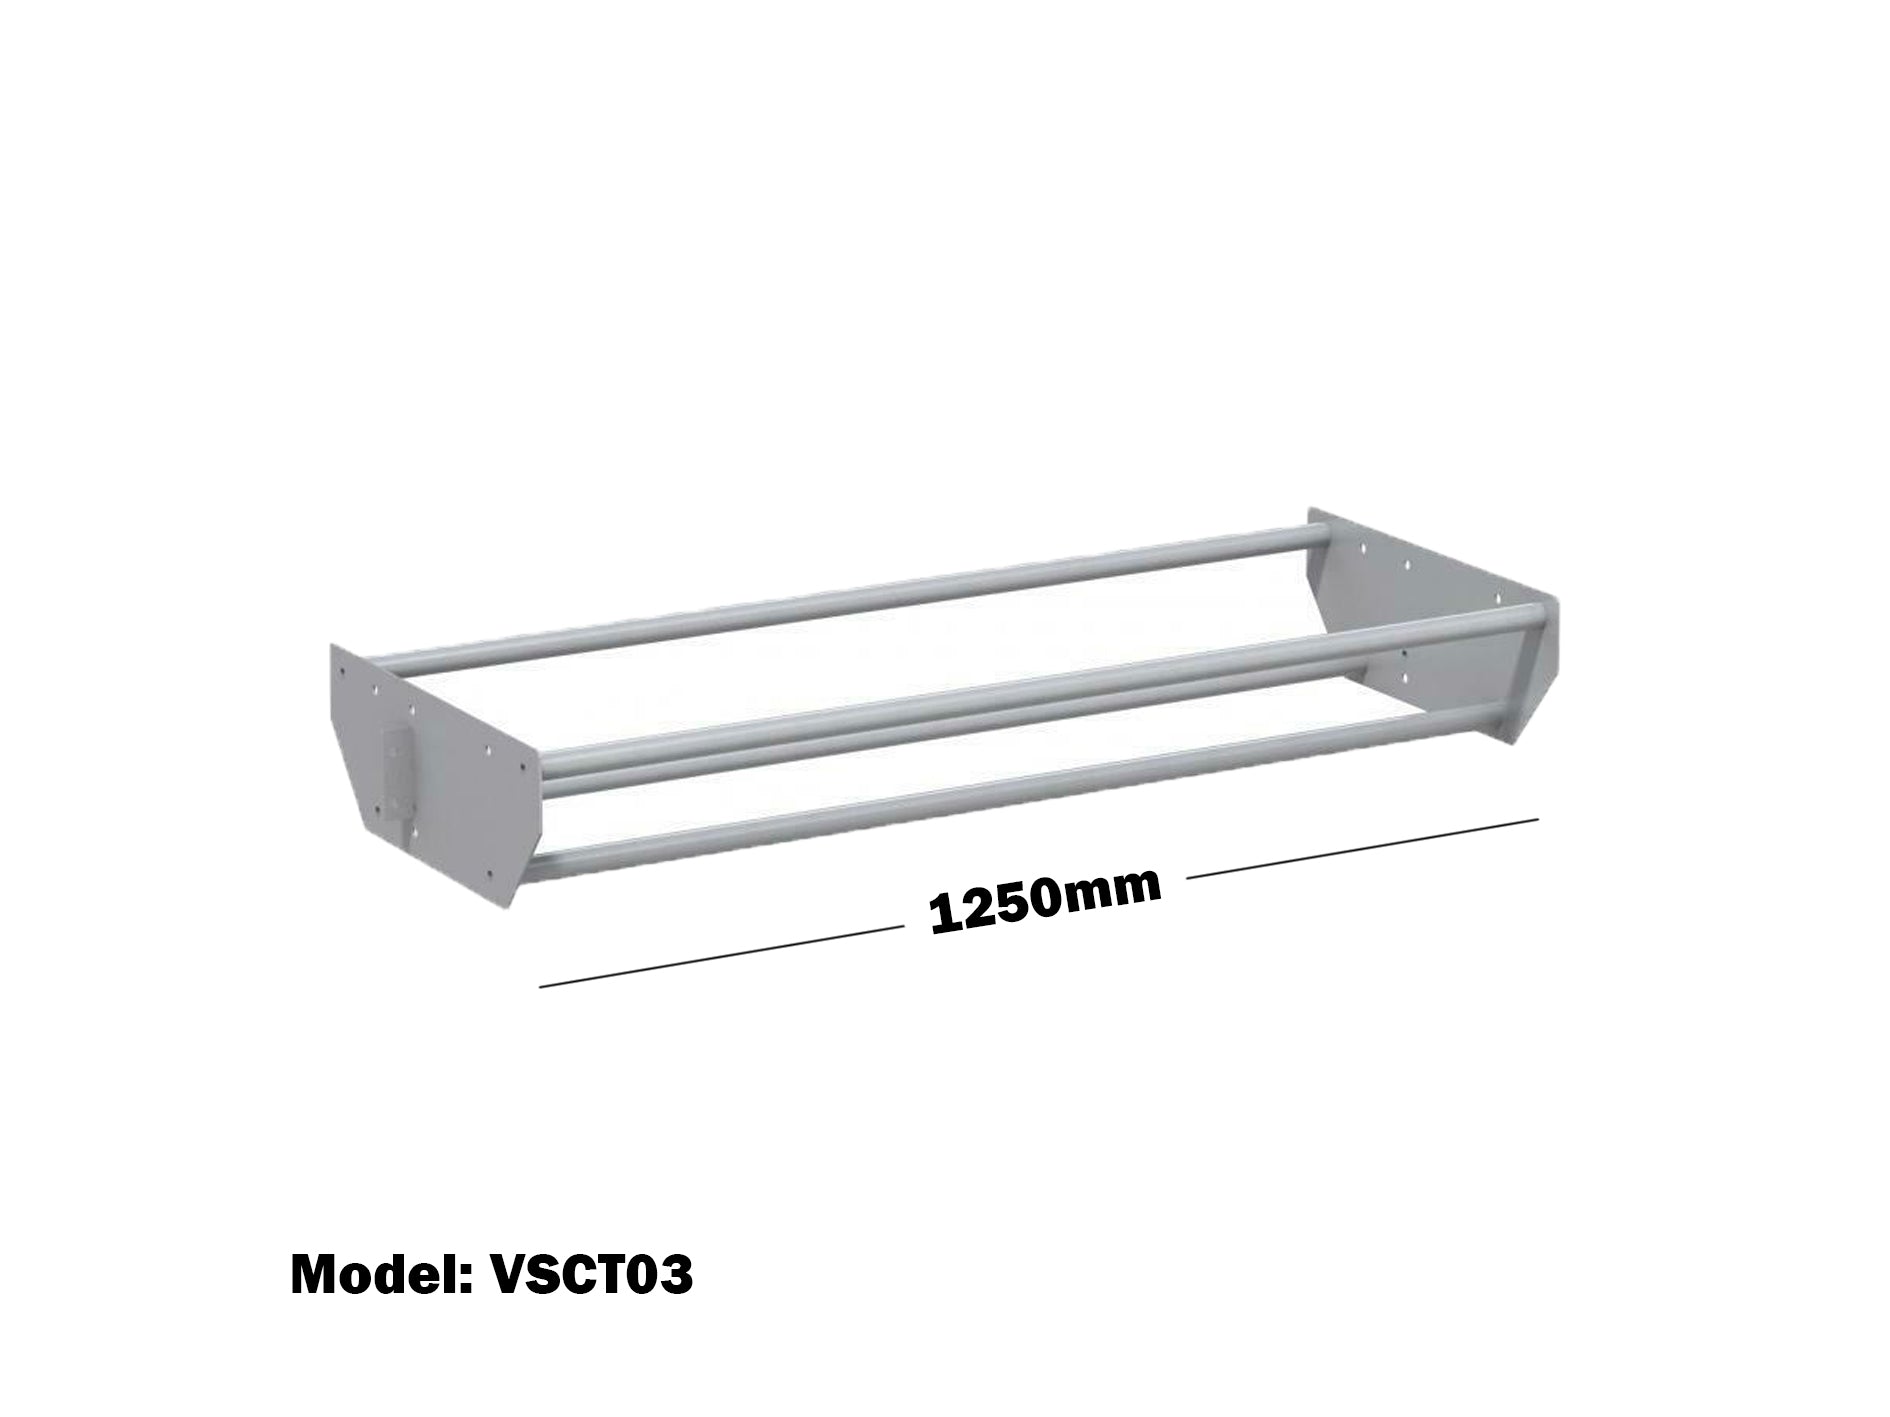 VAN SHELVING CABLE TRAY FOR VAN SHELVING SYSTEM VSCT01-03